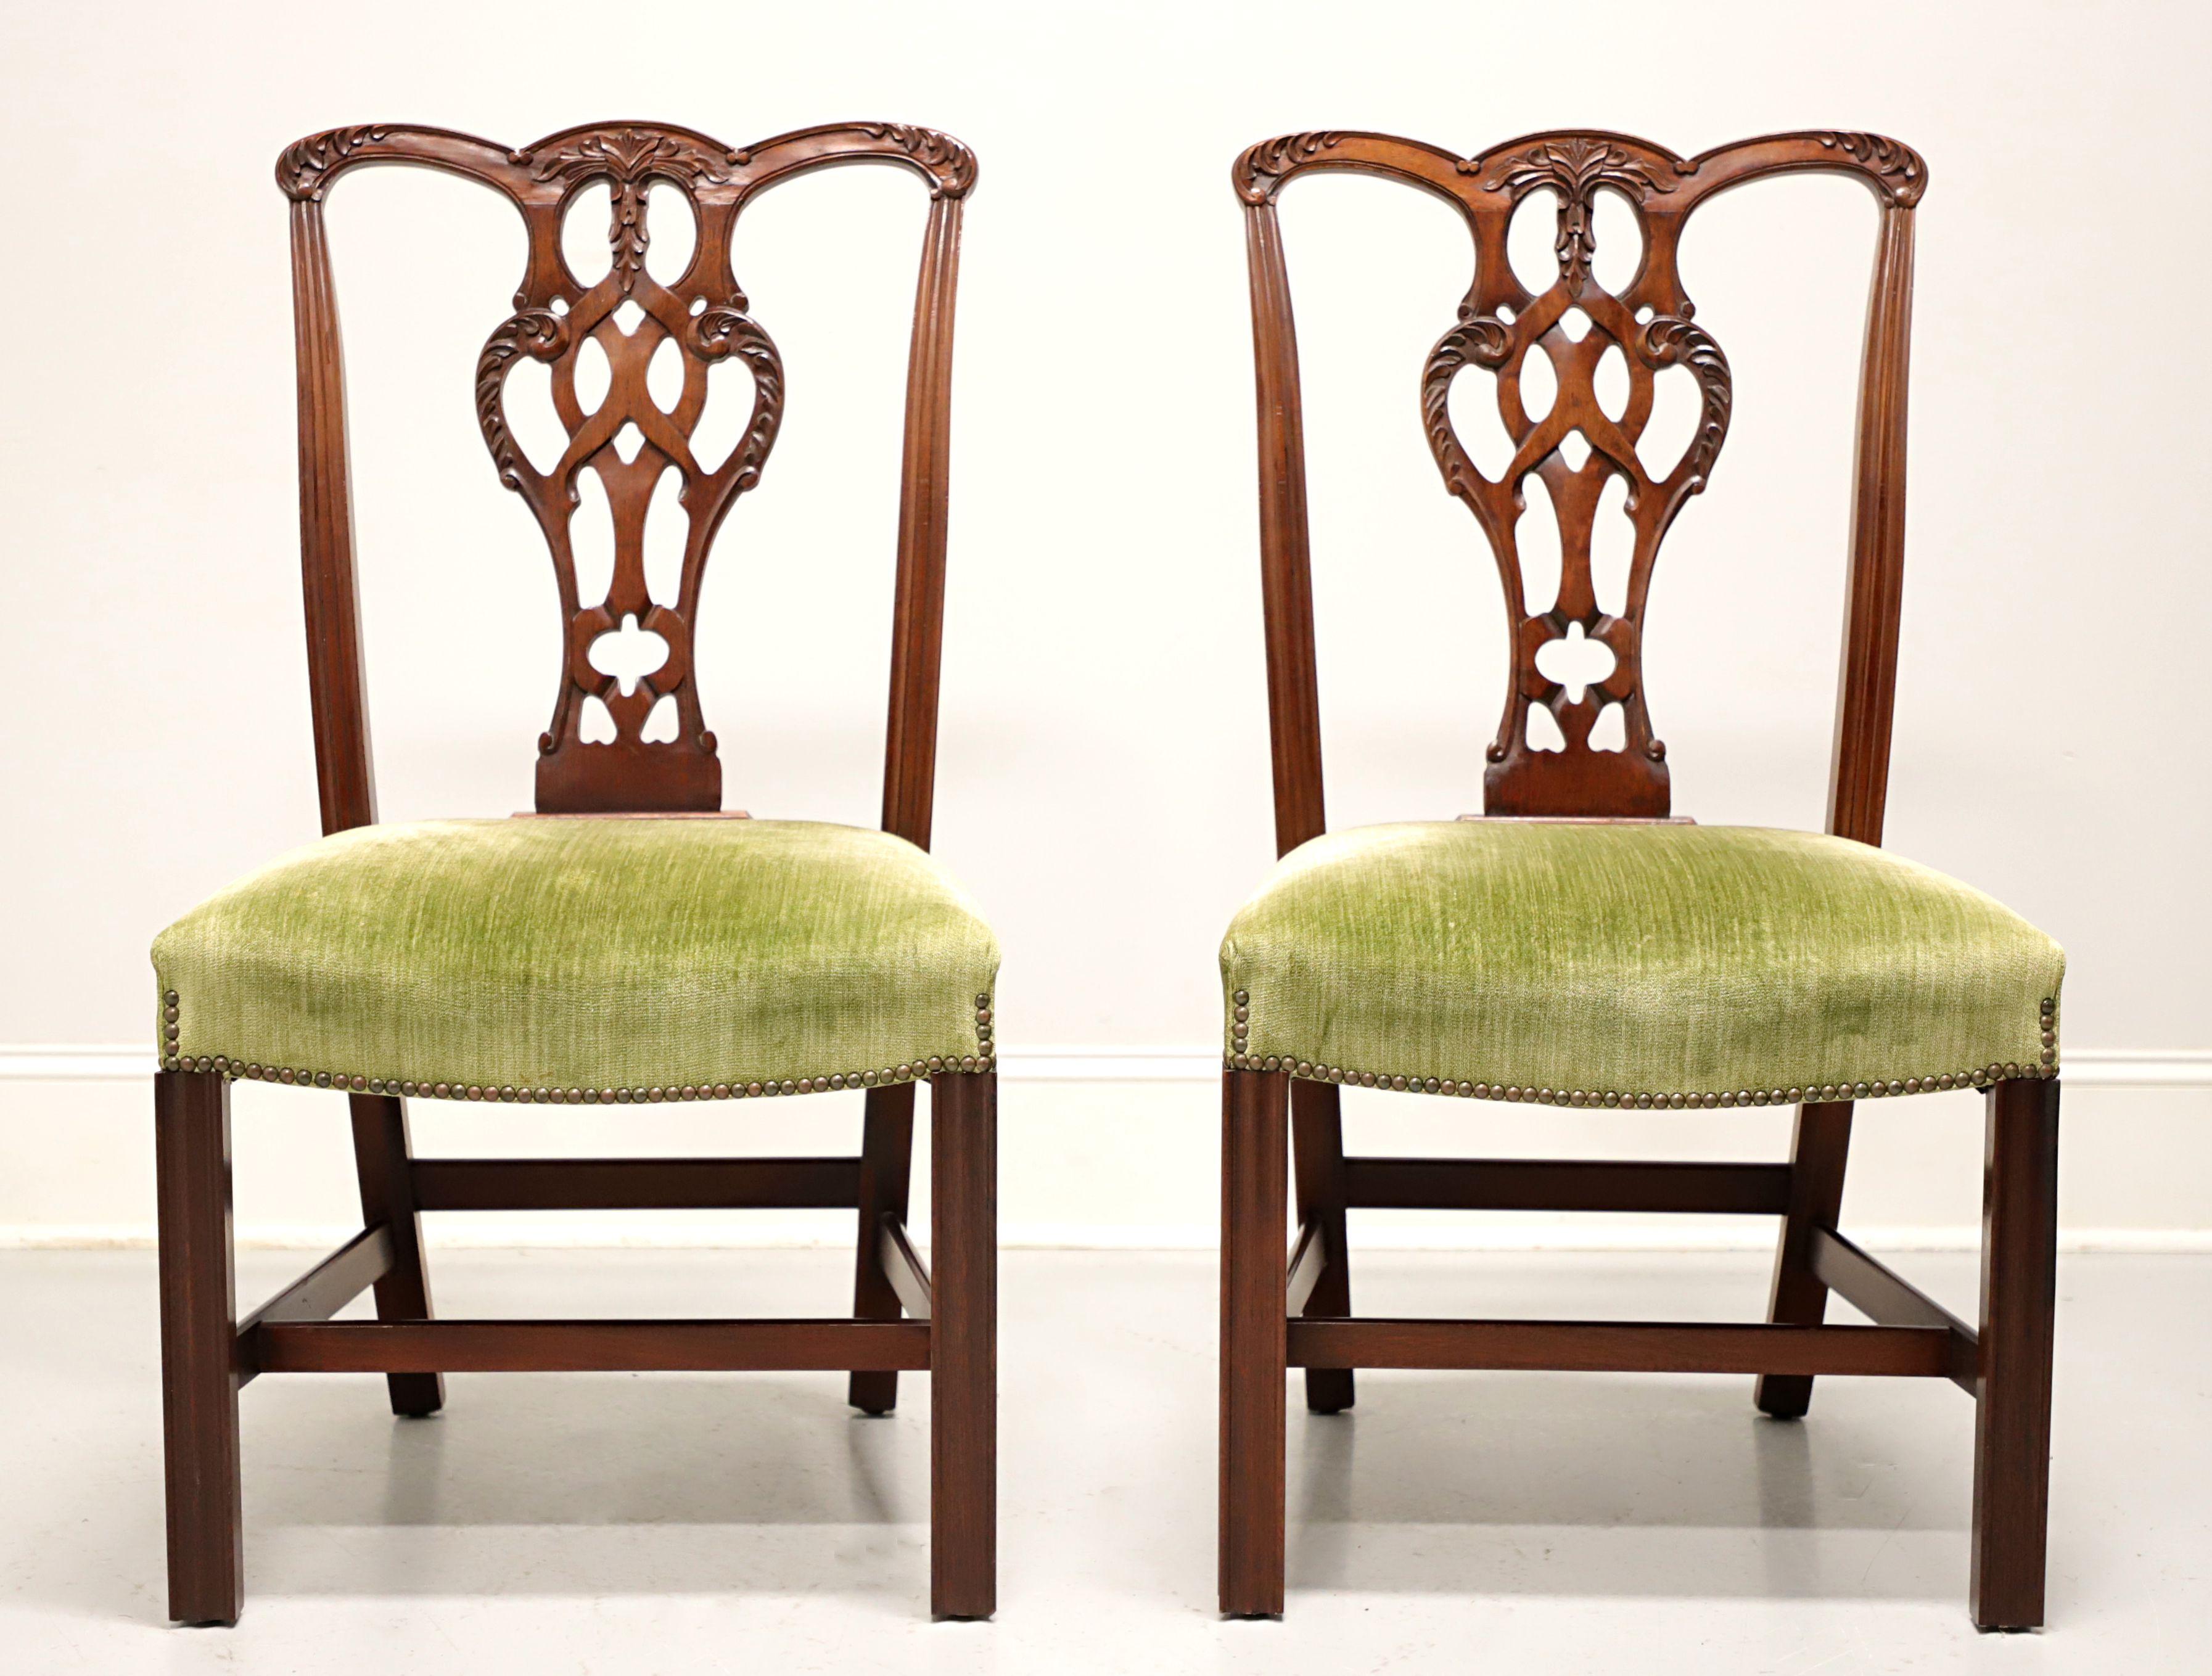 American CRAFTIQUE Mahogany Chippendale Style Straight Leg Dining Side Chairs - Pair C For Sale